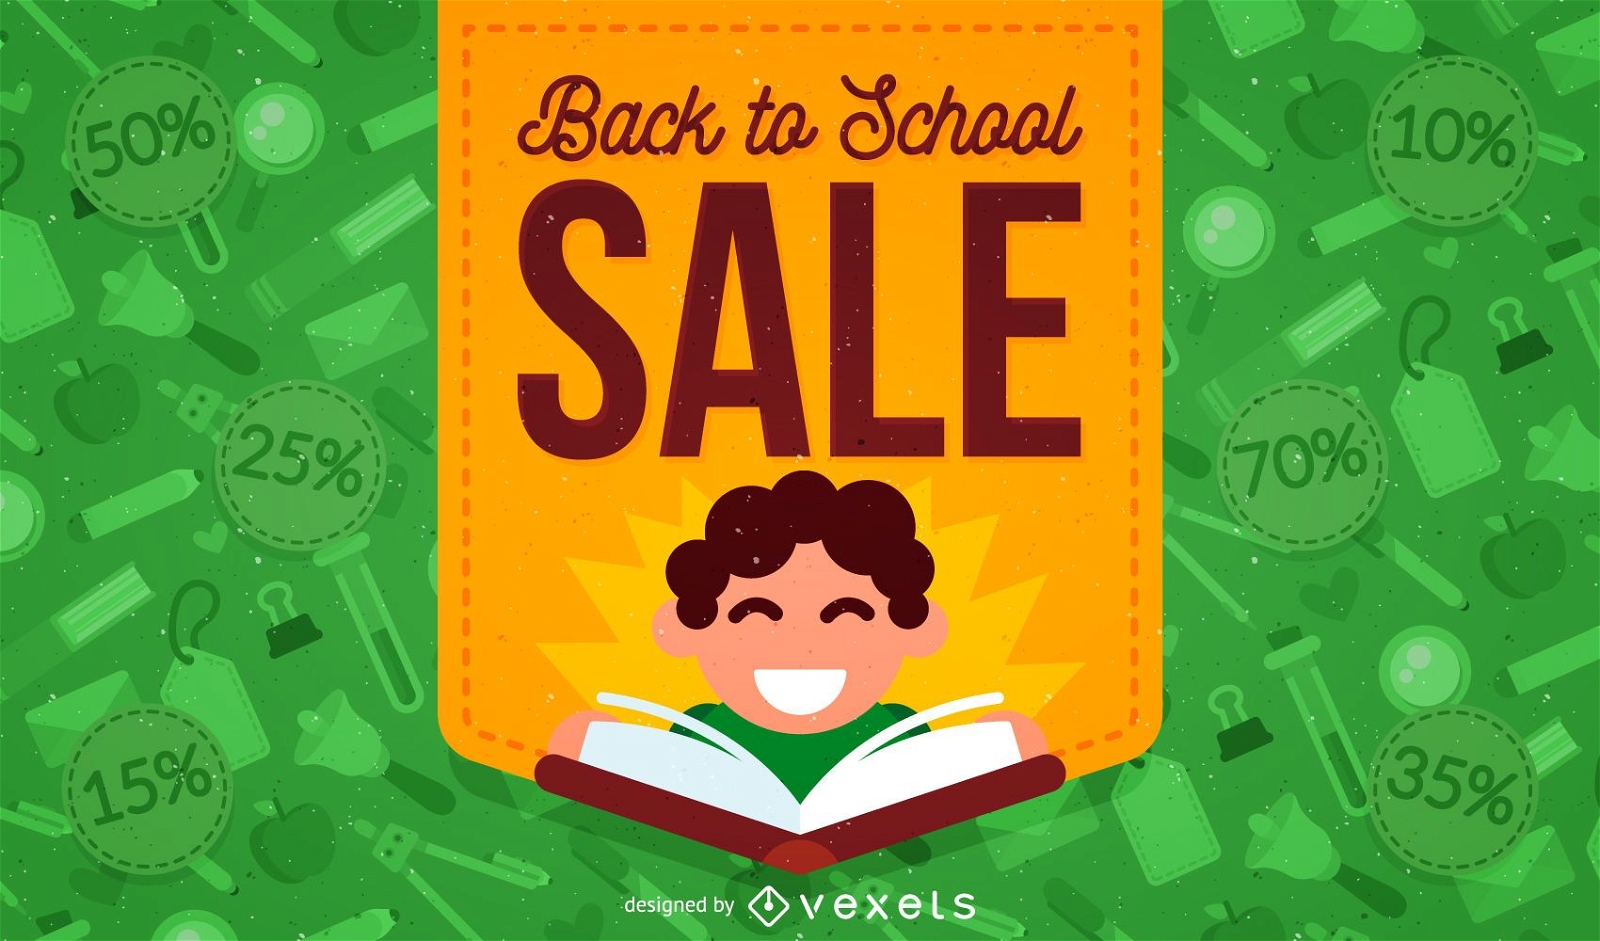 Back to School sale with illustration